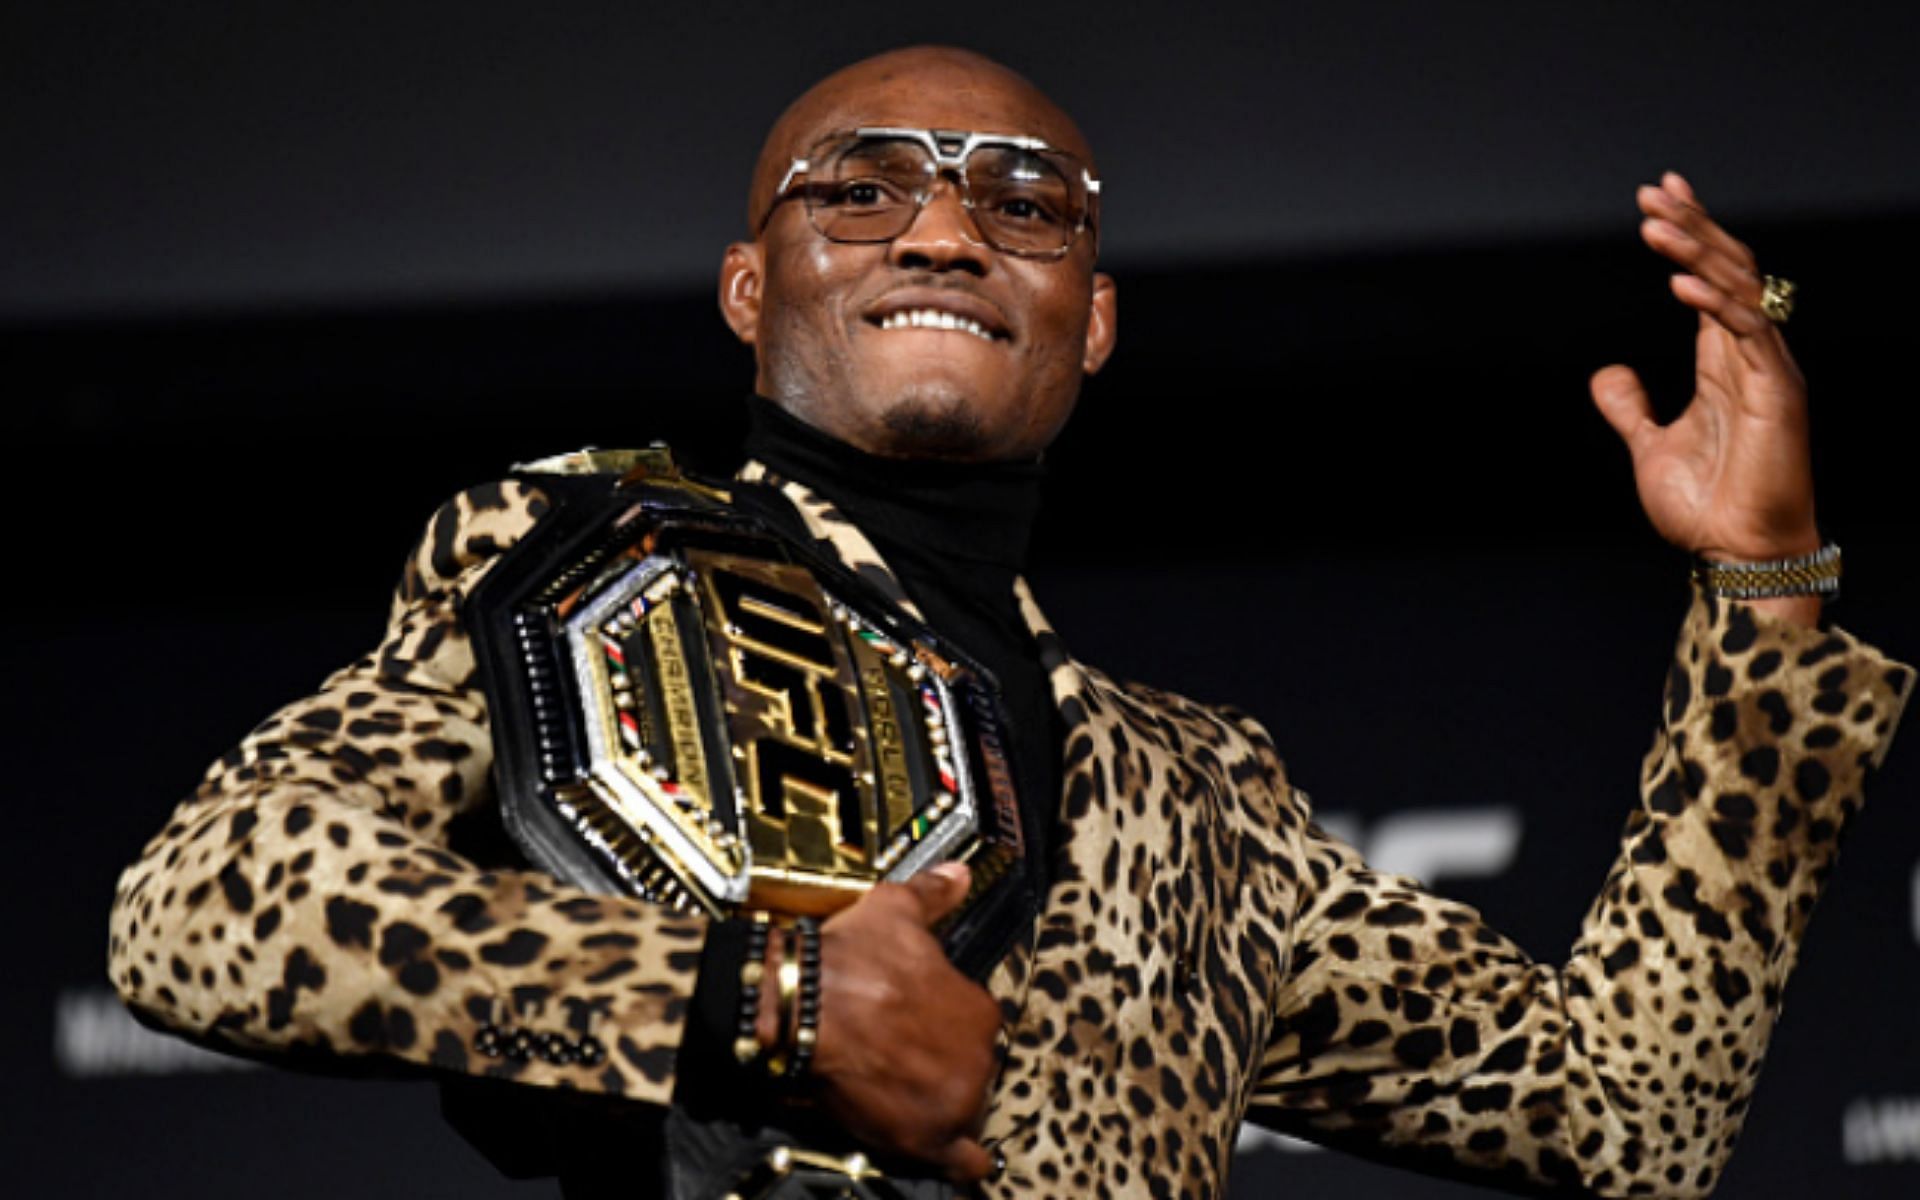 Kamaru Usman is heralded amongst the greatest MMA fighters in the world